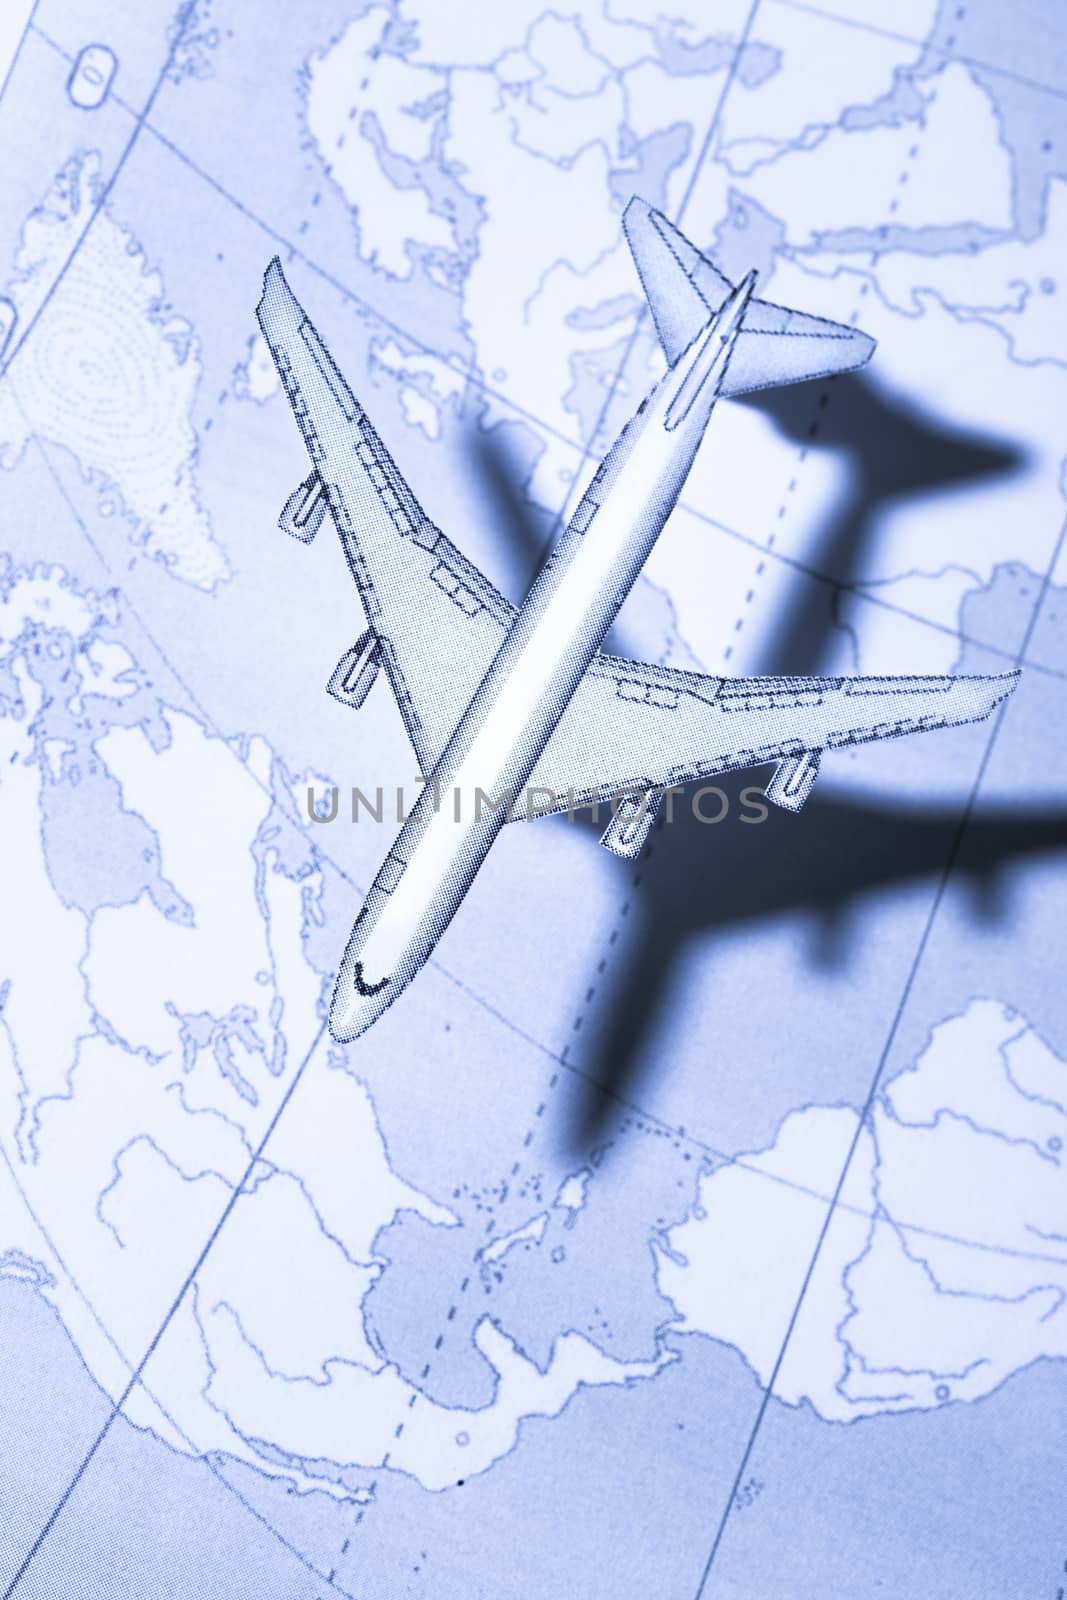 Airplane above the map in blue by Garsya